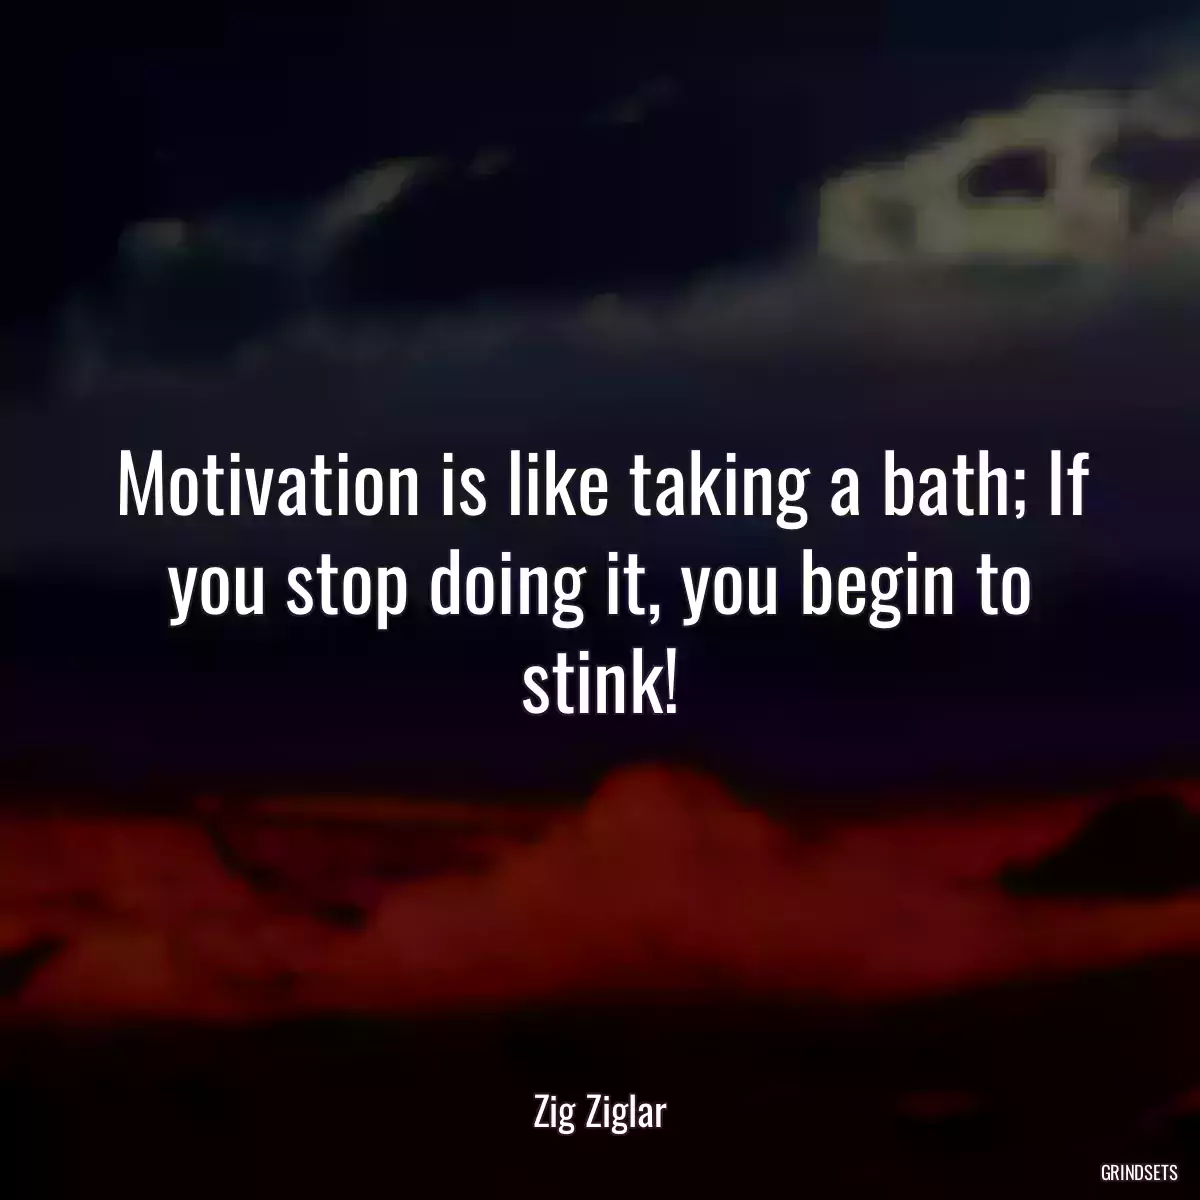 Motivation is like taking a bath; If you stop doing it, you begin to stink!